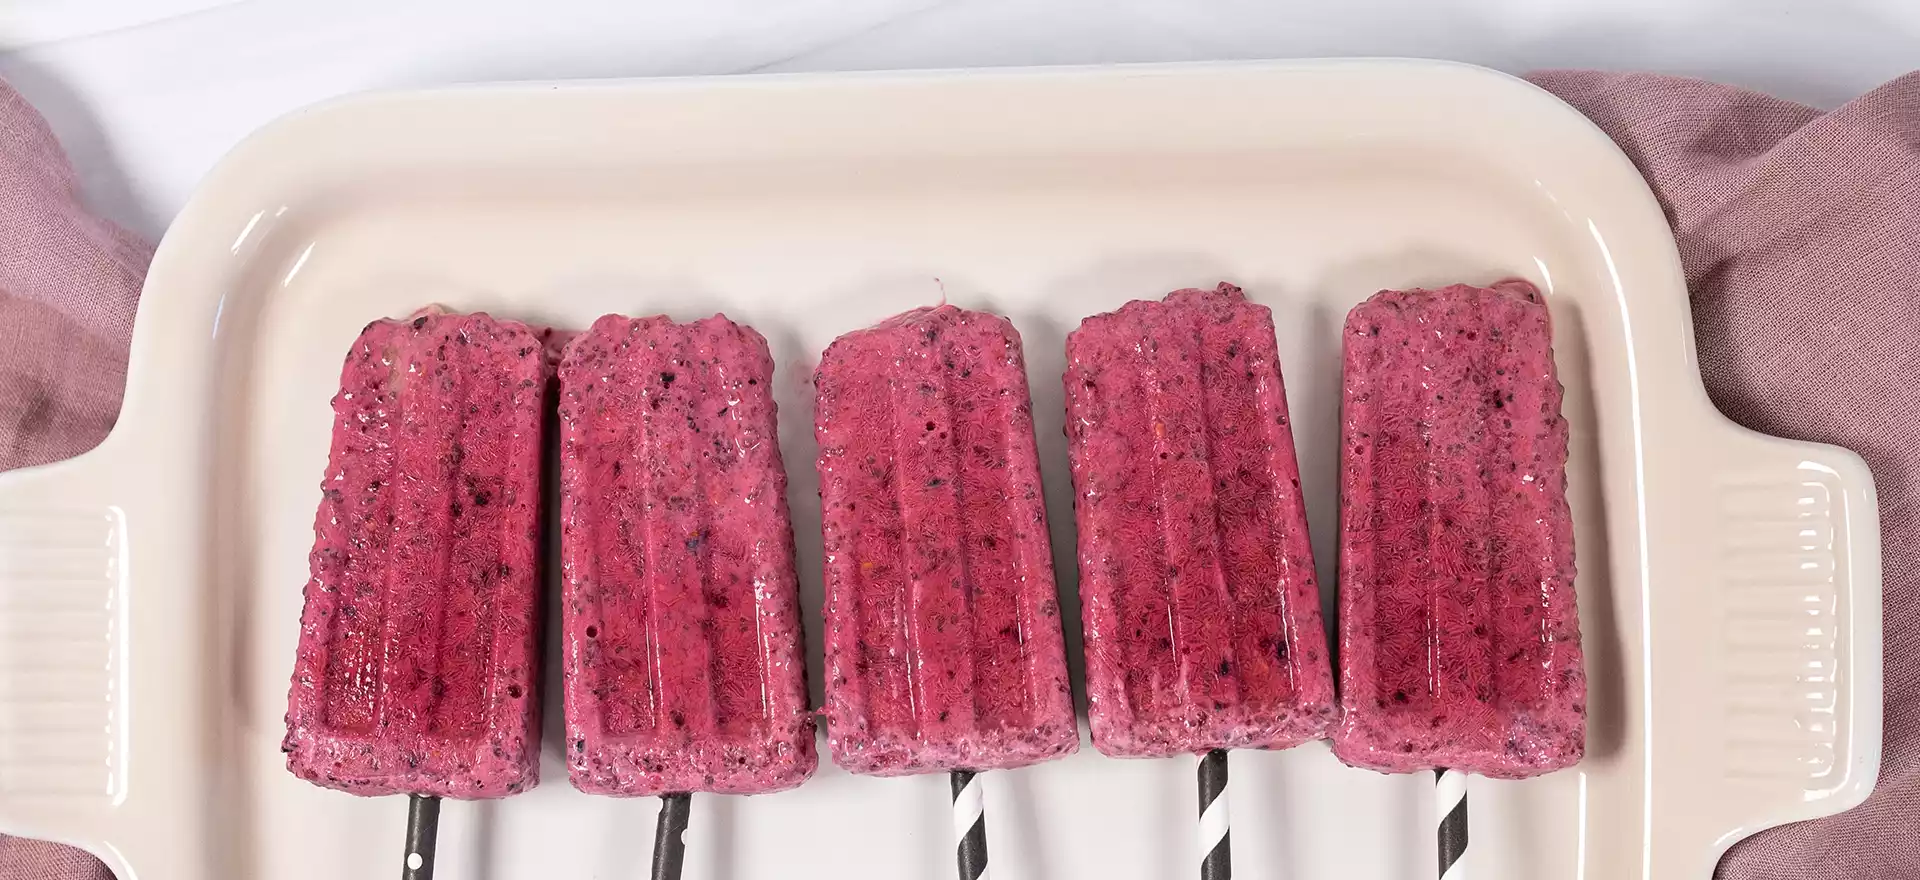 Fruit popsicles from The Happy Healthy Gut Cookbook